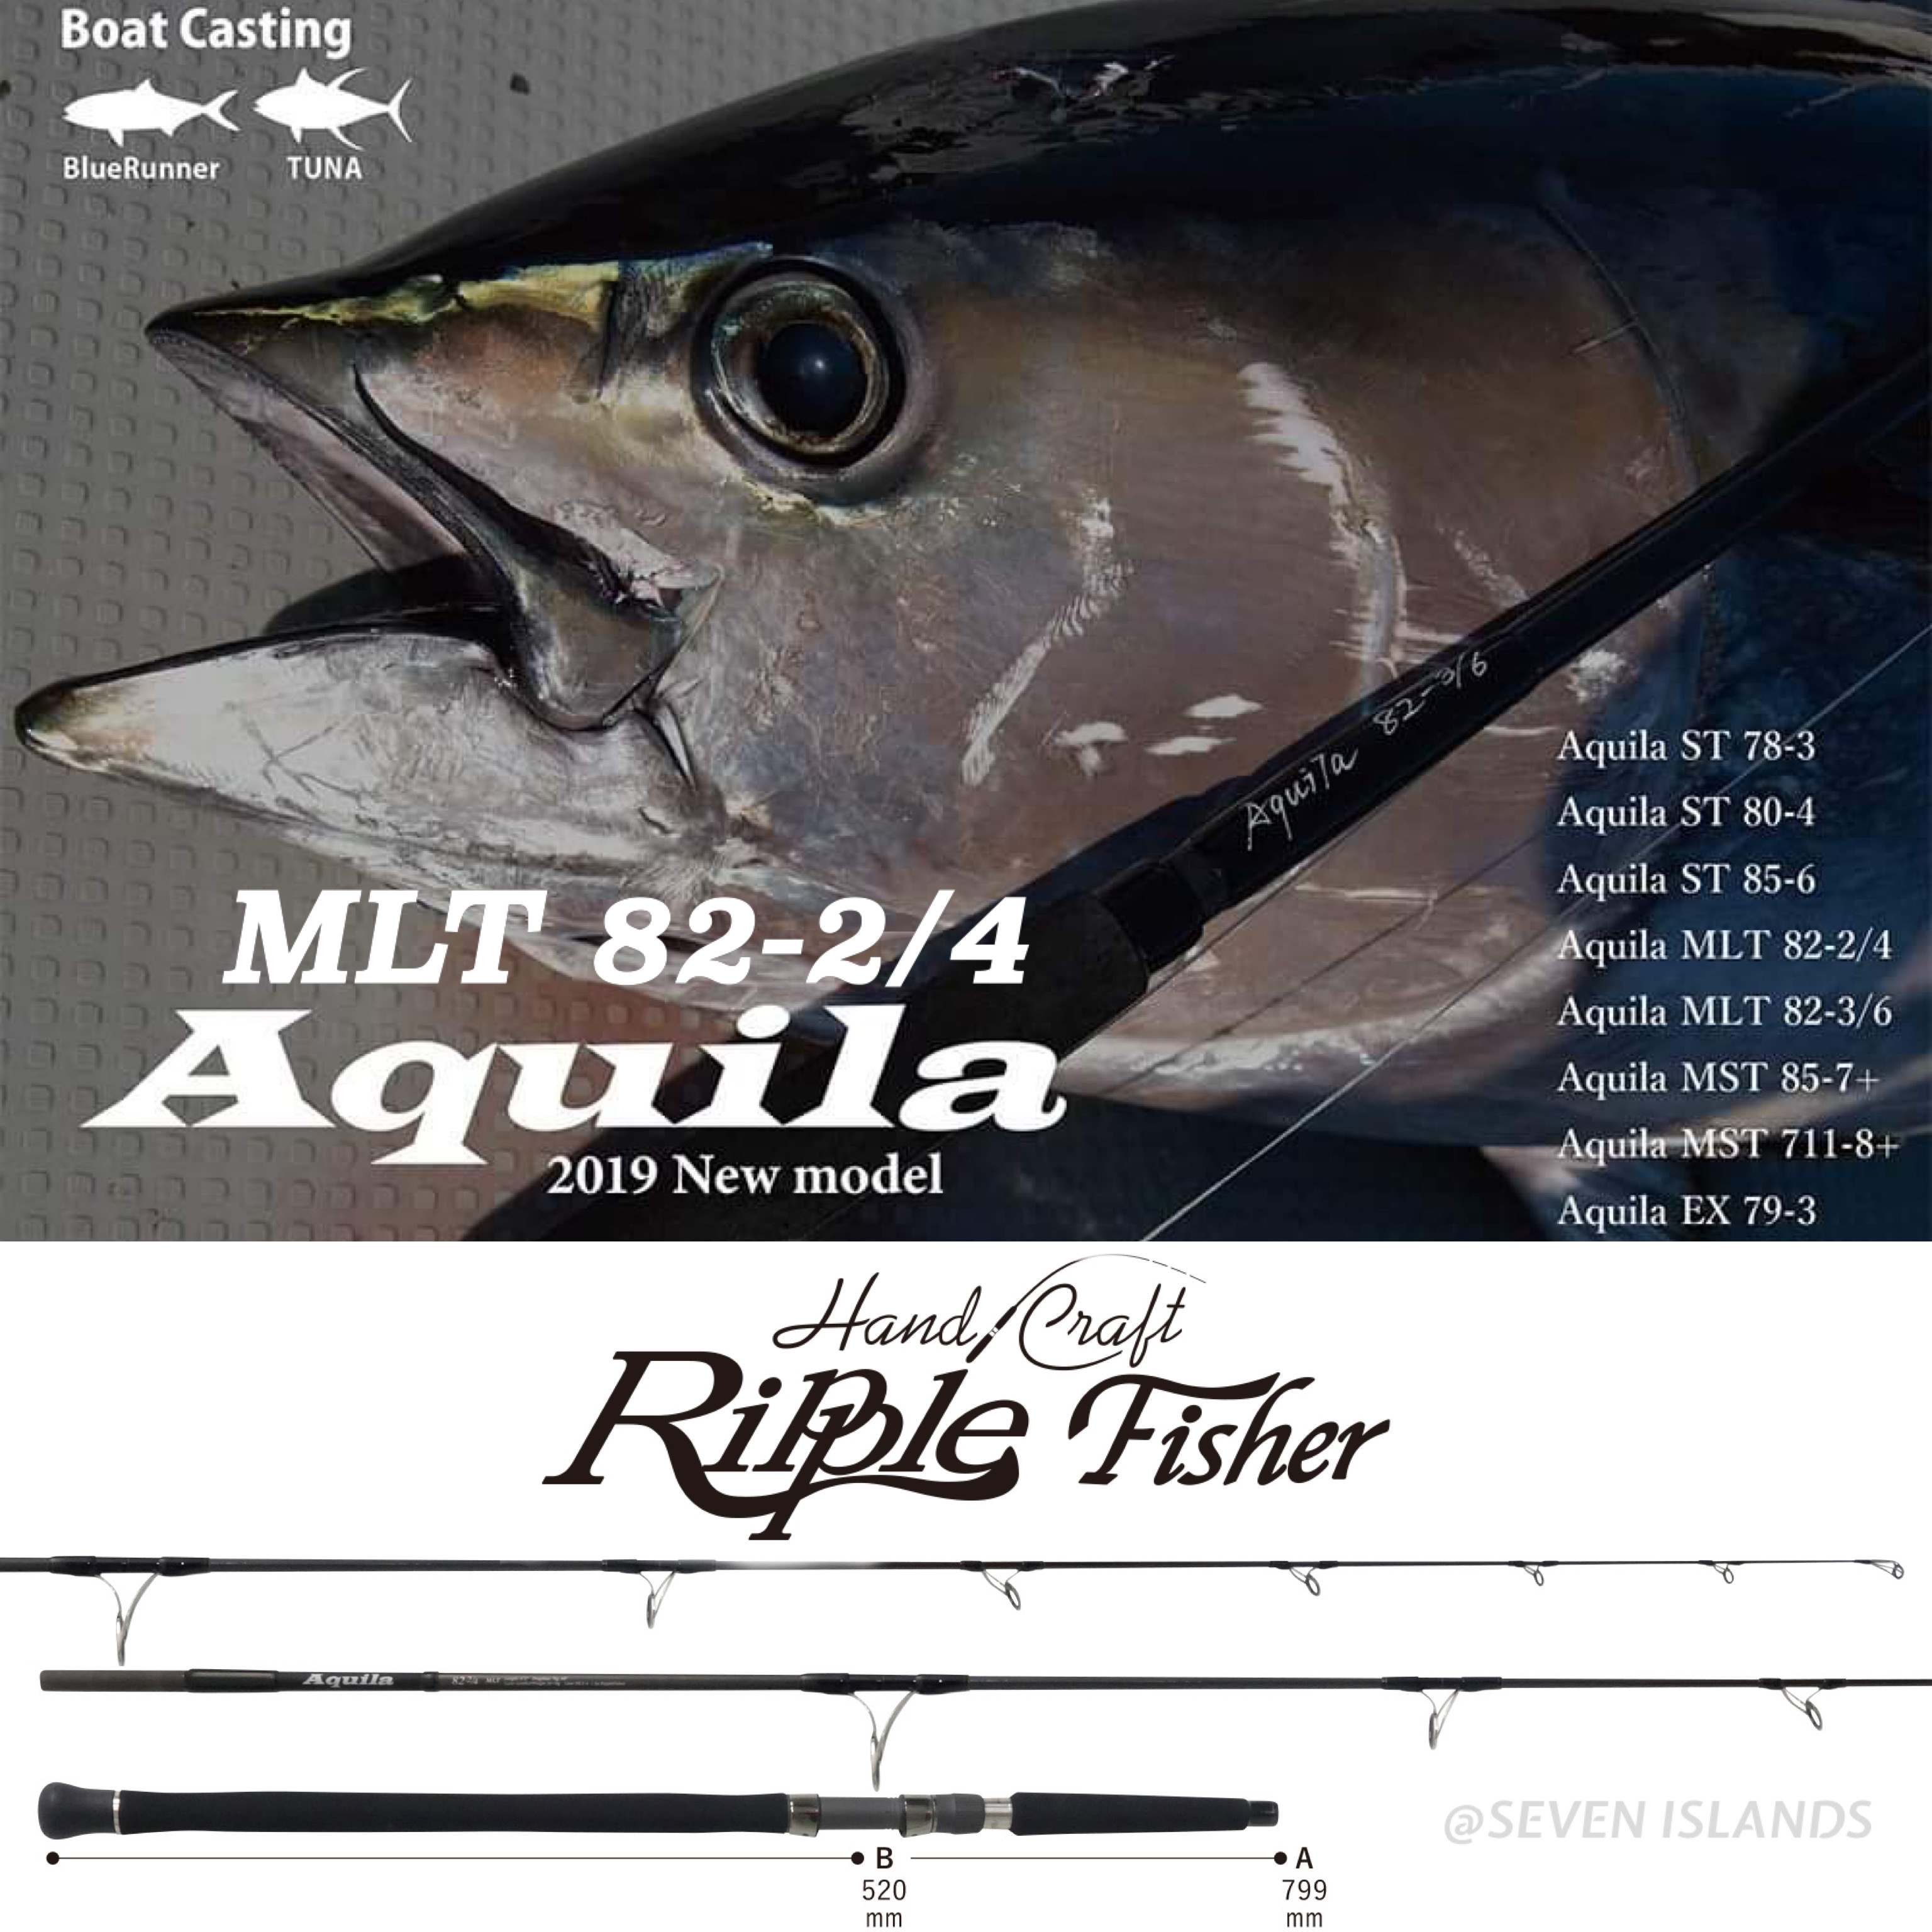 RIPPLE FISHER AQUILA COLLECTION ST80-4/MLT82-2/4